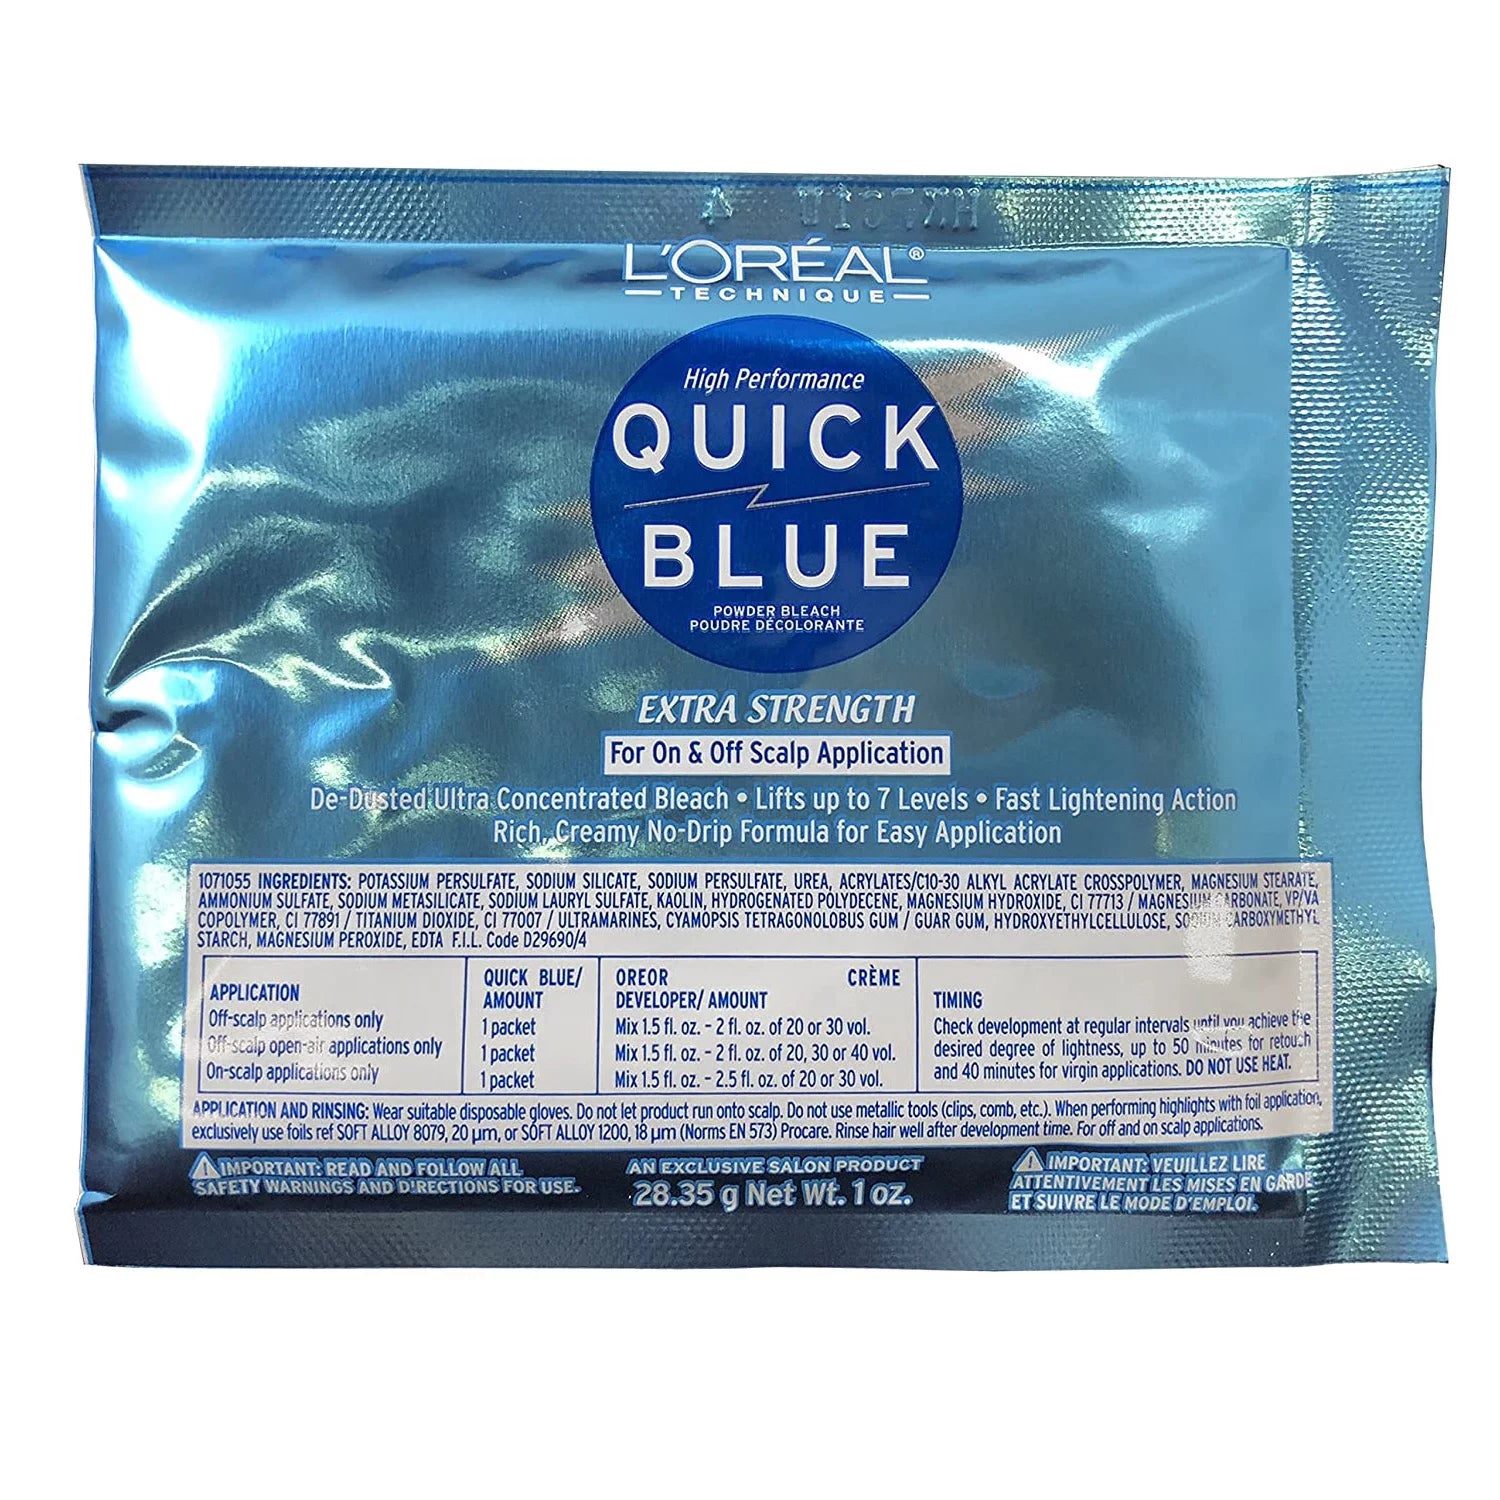 LOREAL® QUICK BLUE PACKETTE DSP (1OZ)